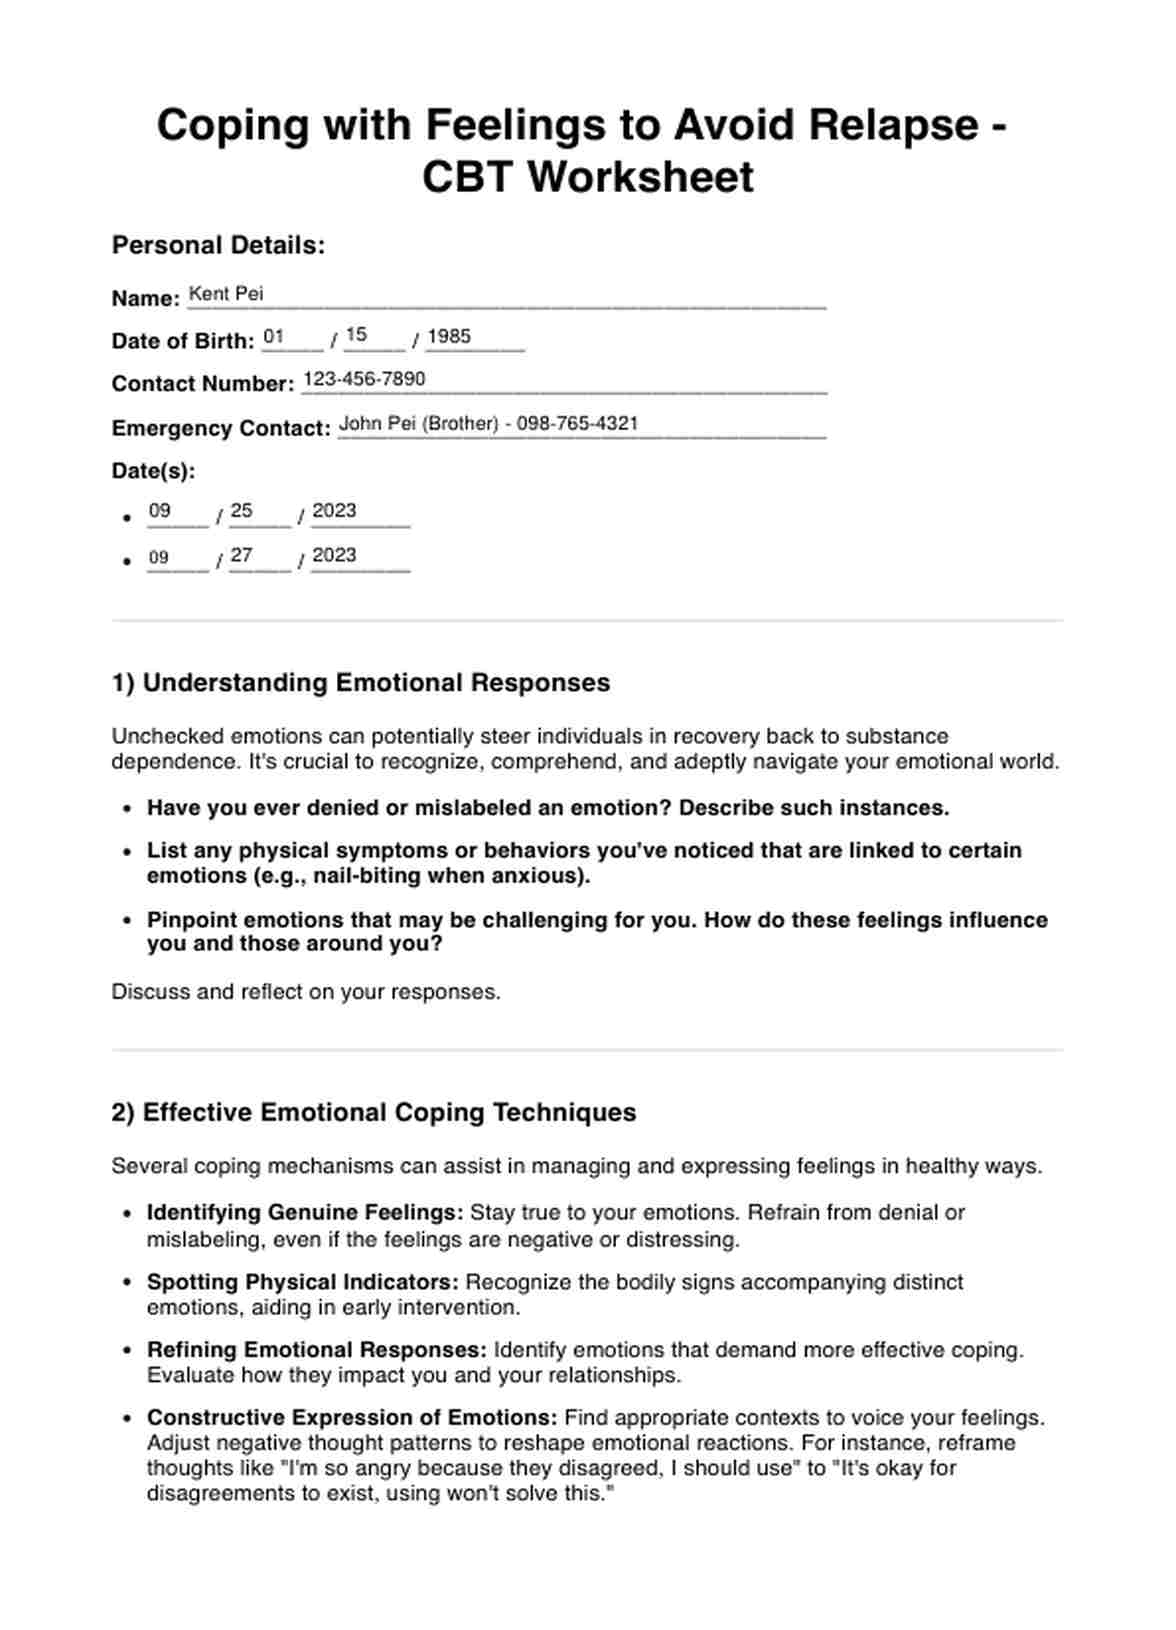 Coping with Feelings to Avoid Relapse CBT Worksheet PDF Example